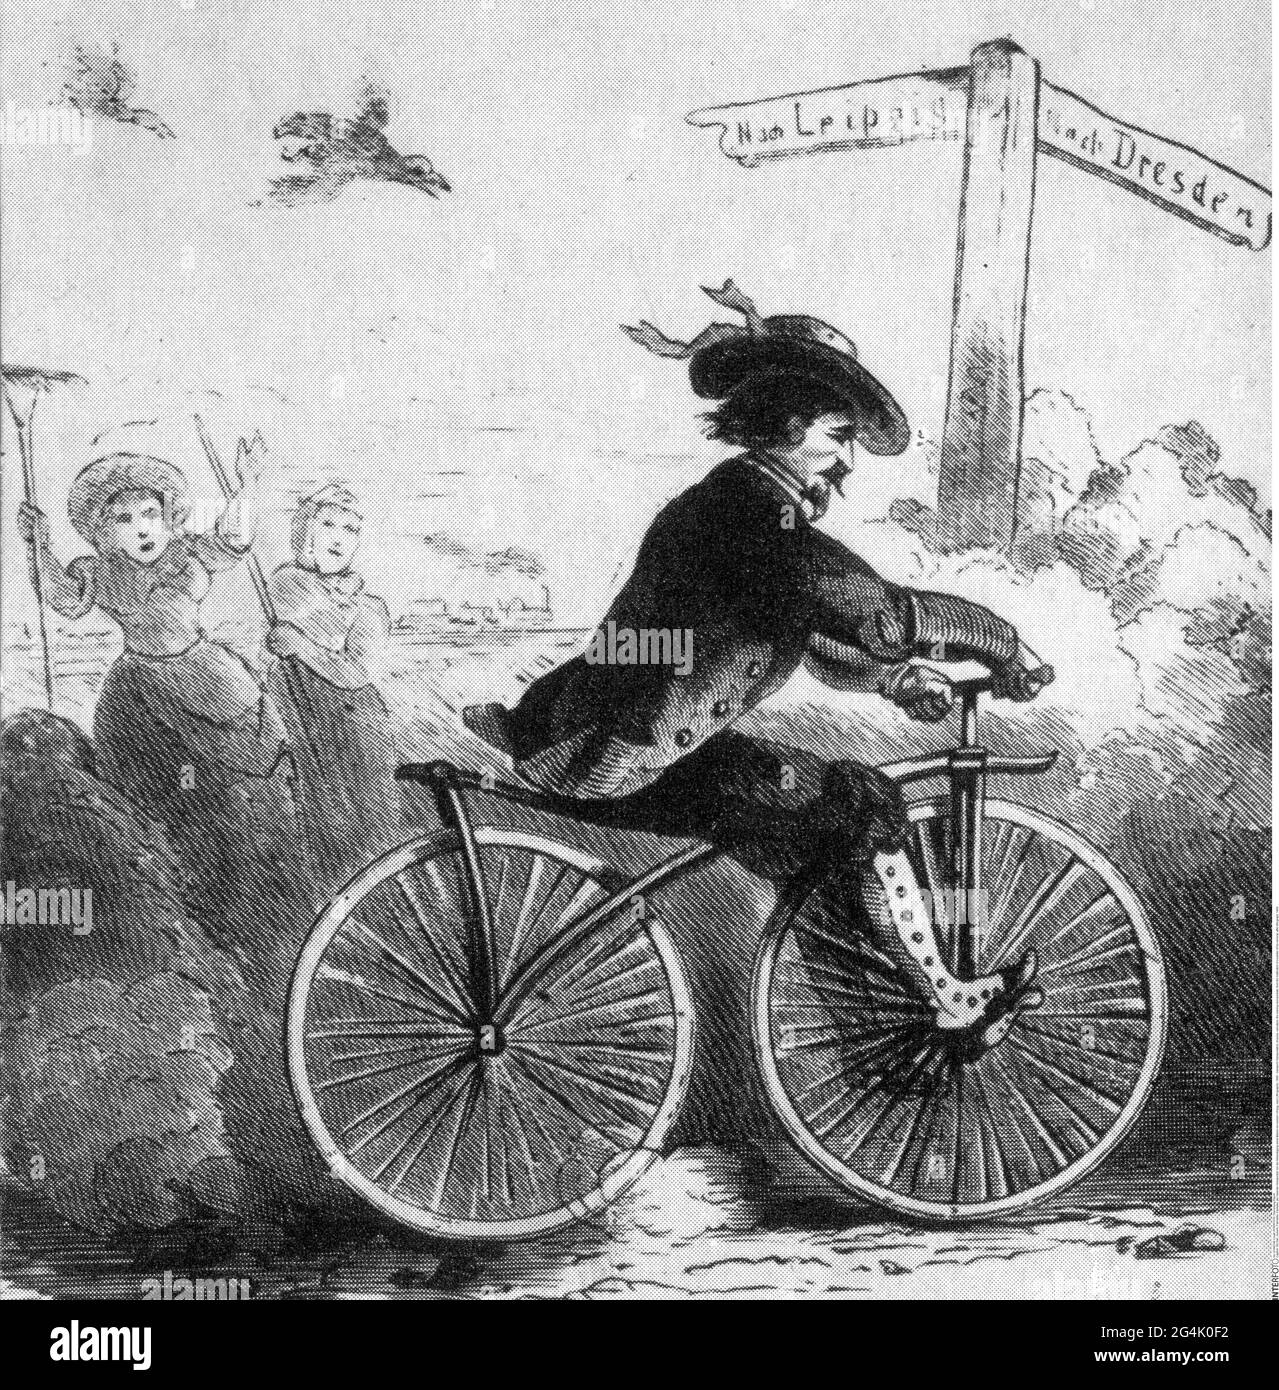 transport / transportation, bicycles, caricature, the rushing velocipediste, ARTIST'S COPYRIGHT HAS NOT TO BE CLEARED Stock Photo